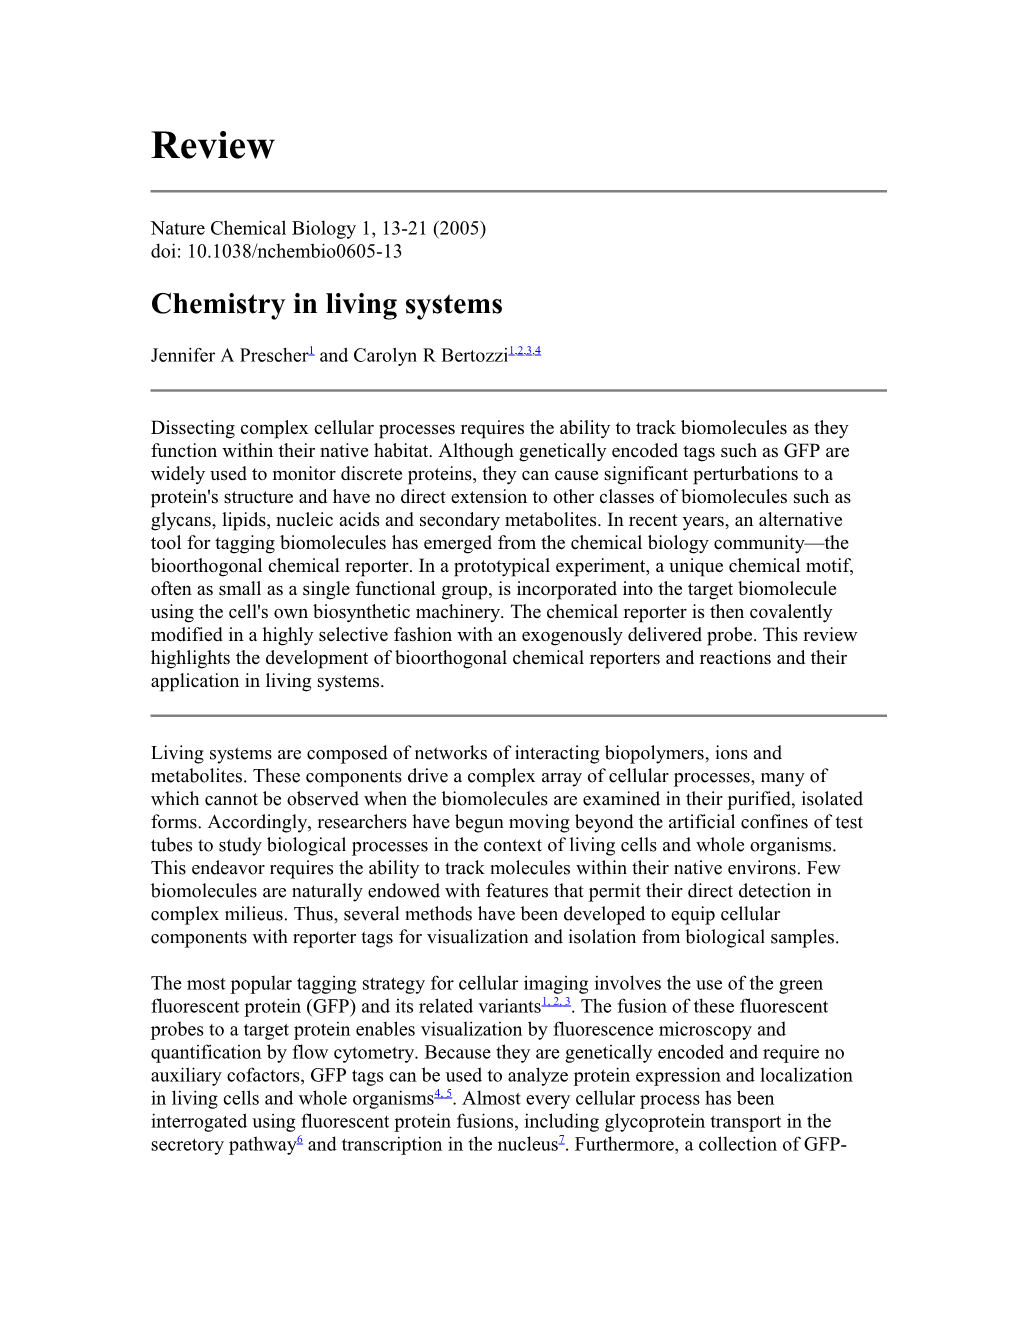 Chemistry in Living Systems